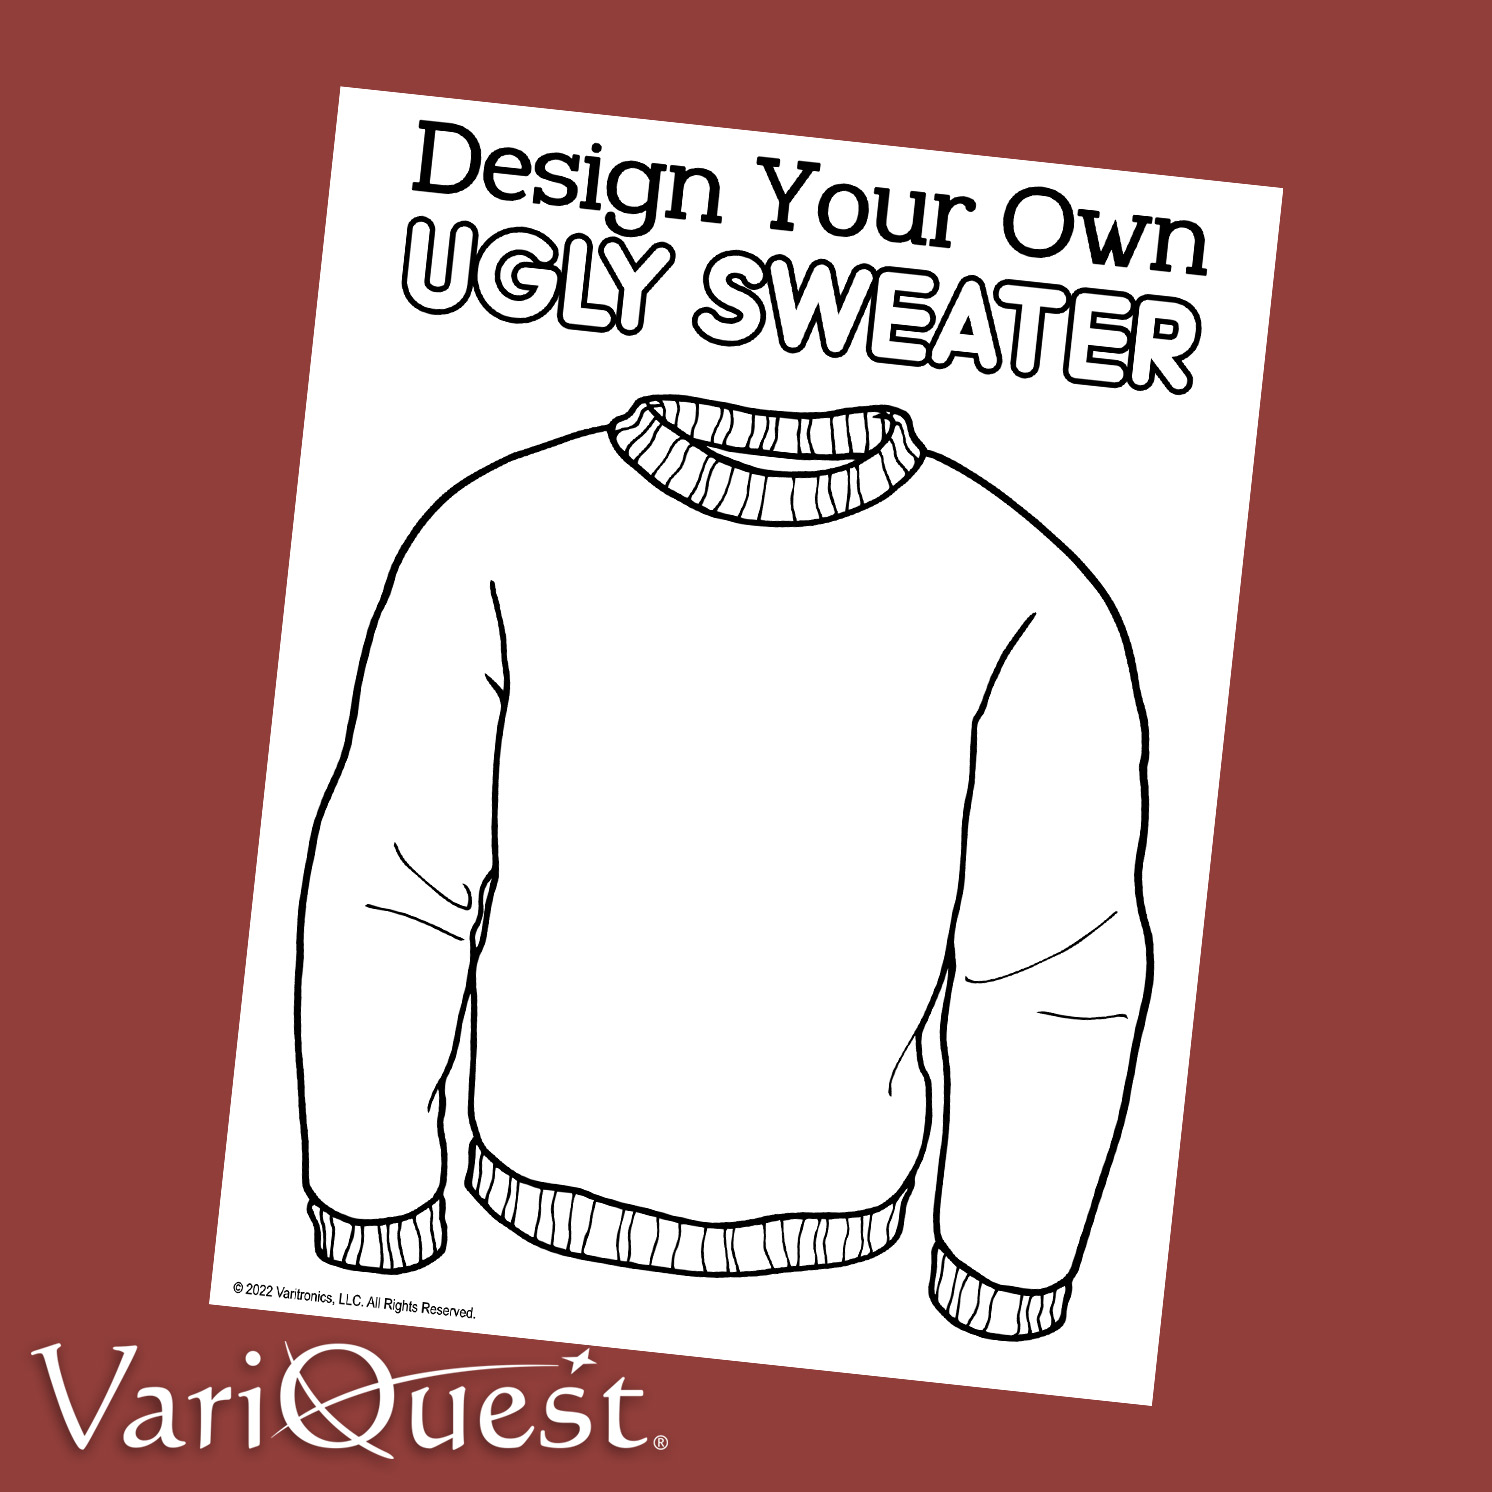 Design Your Own Ugly Sweater Activity Download | VariQuest